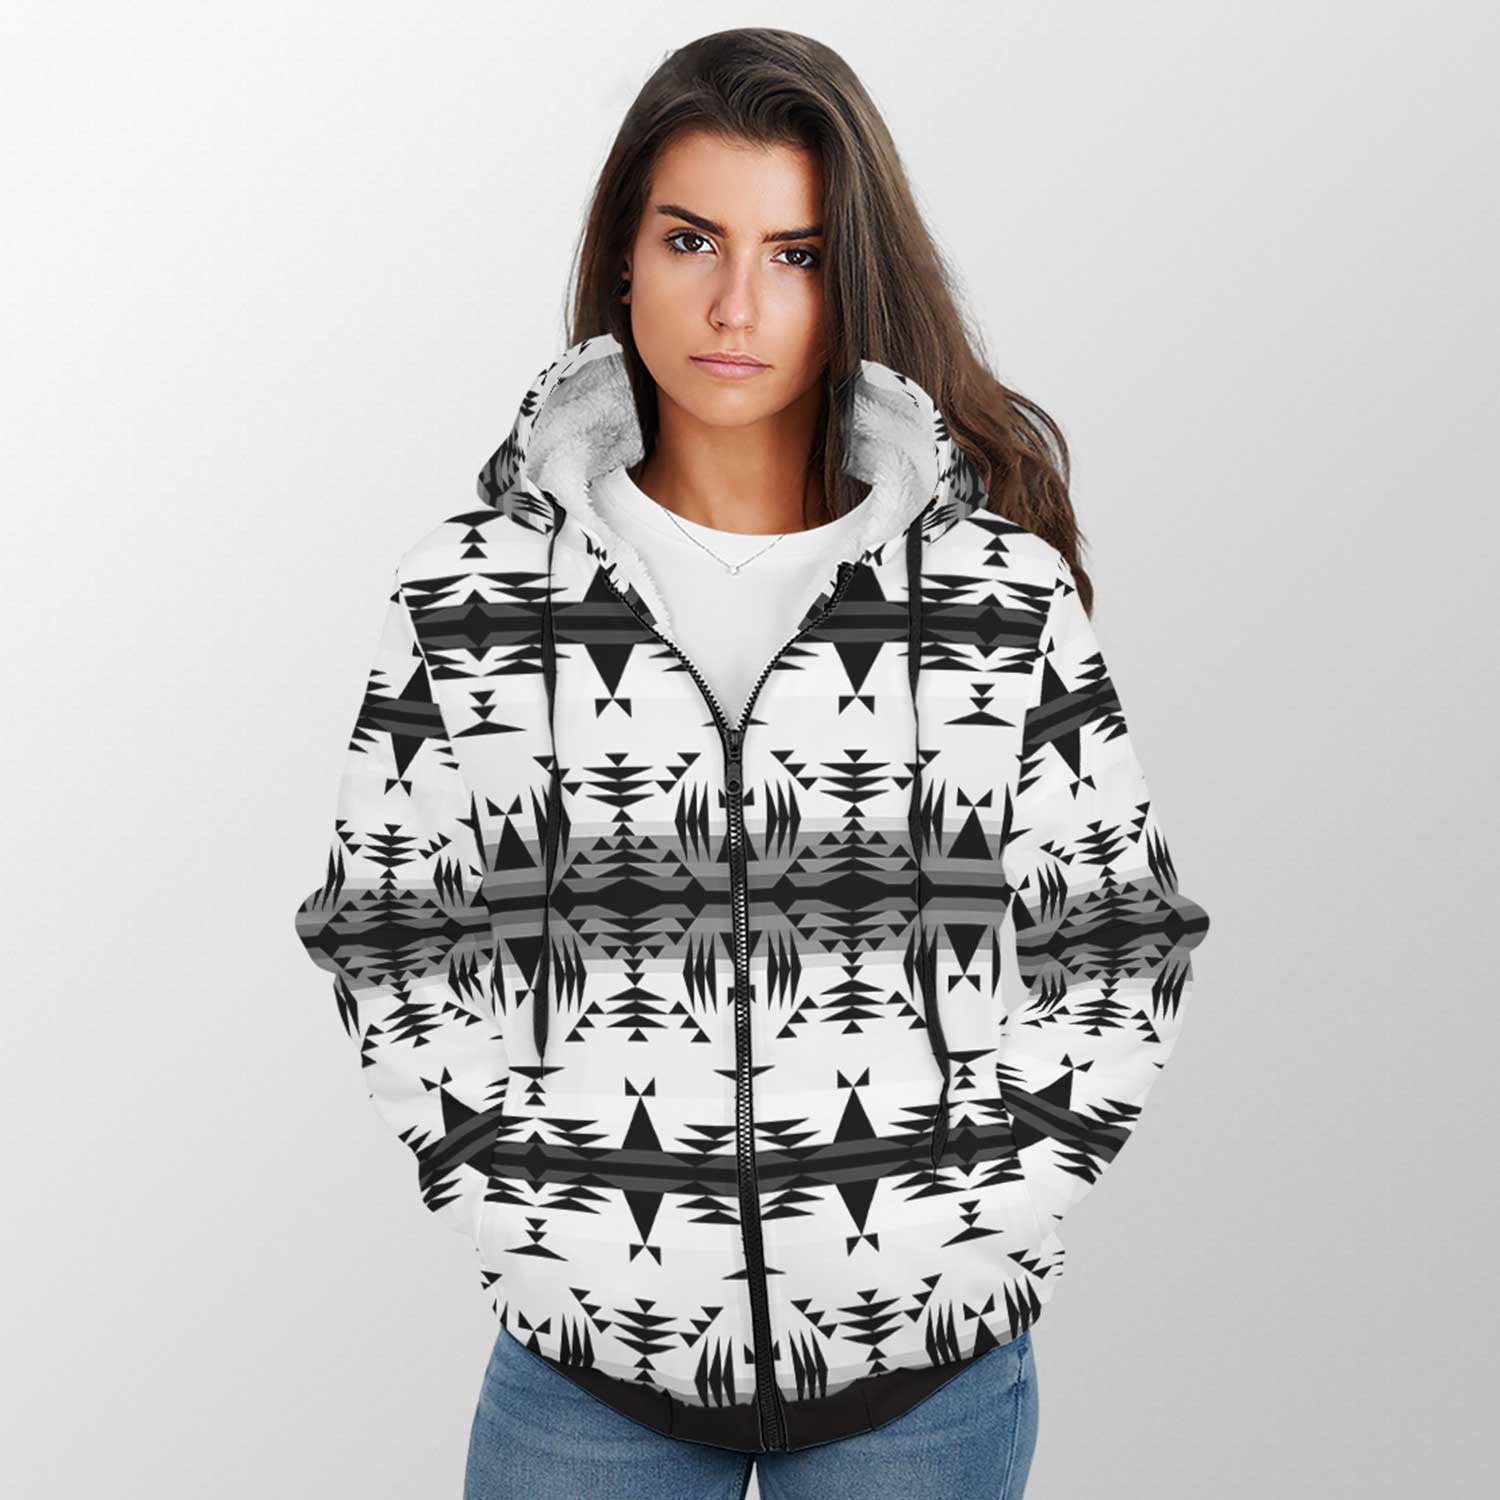 Between the Mountains White and Black Sherpa Hoodie 49 Dzine 